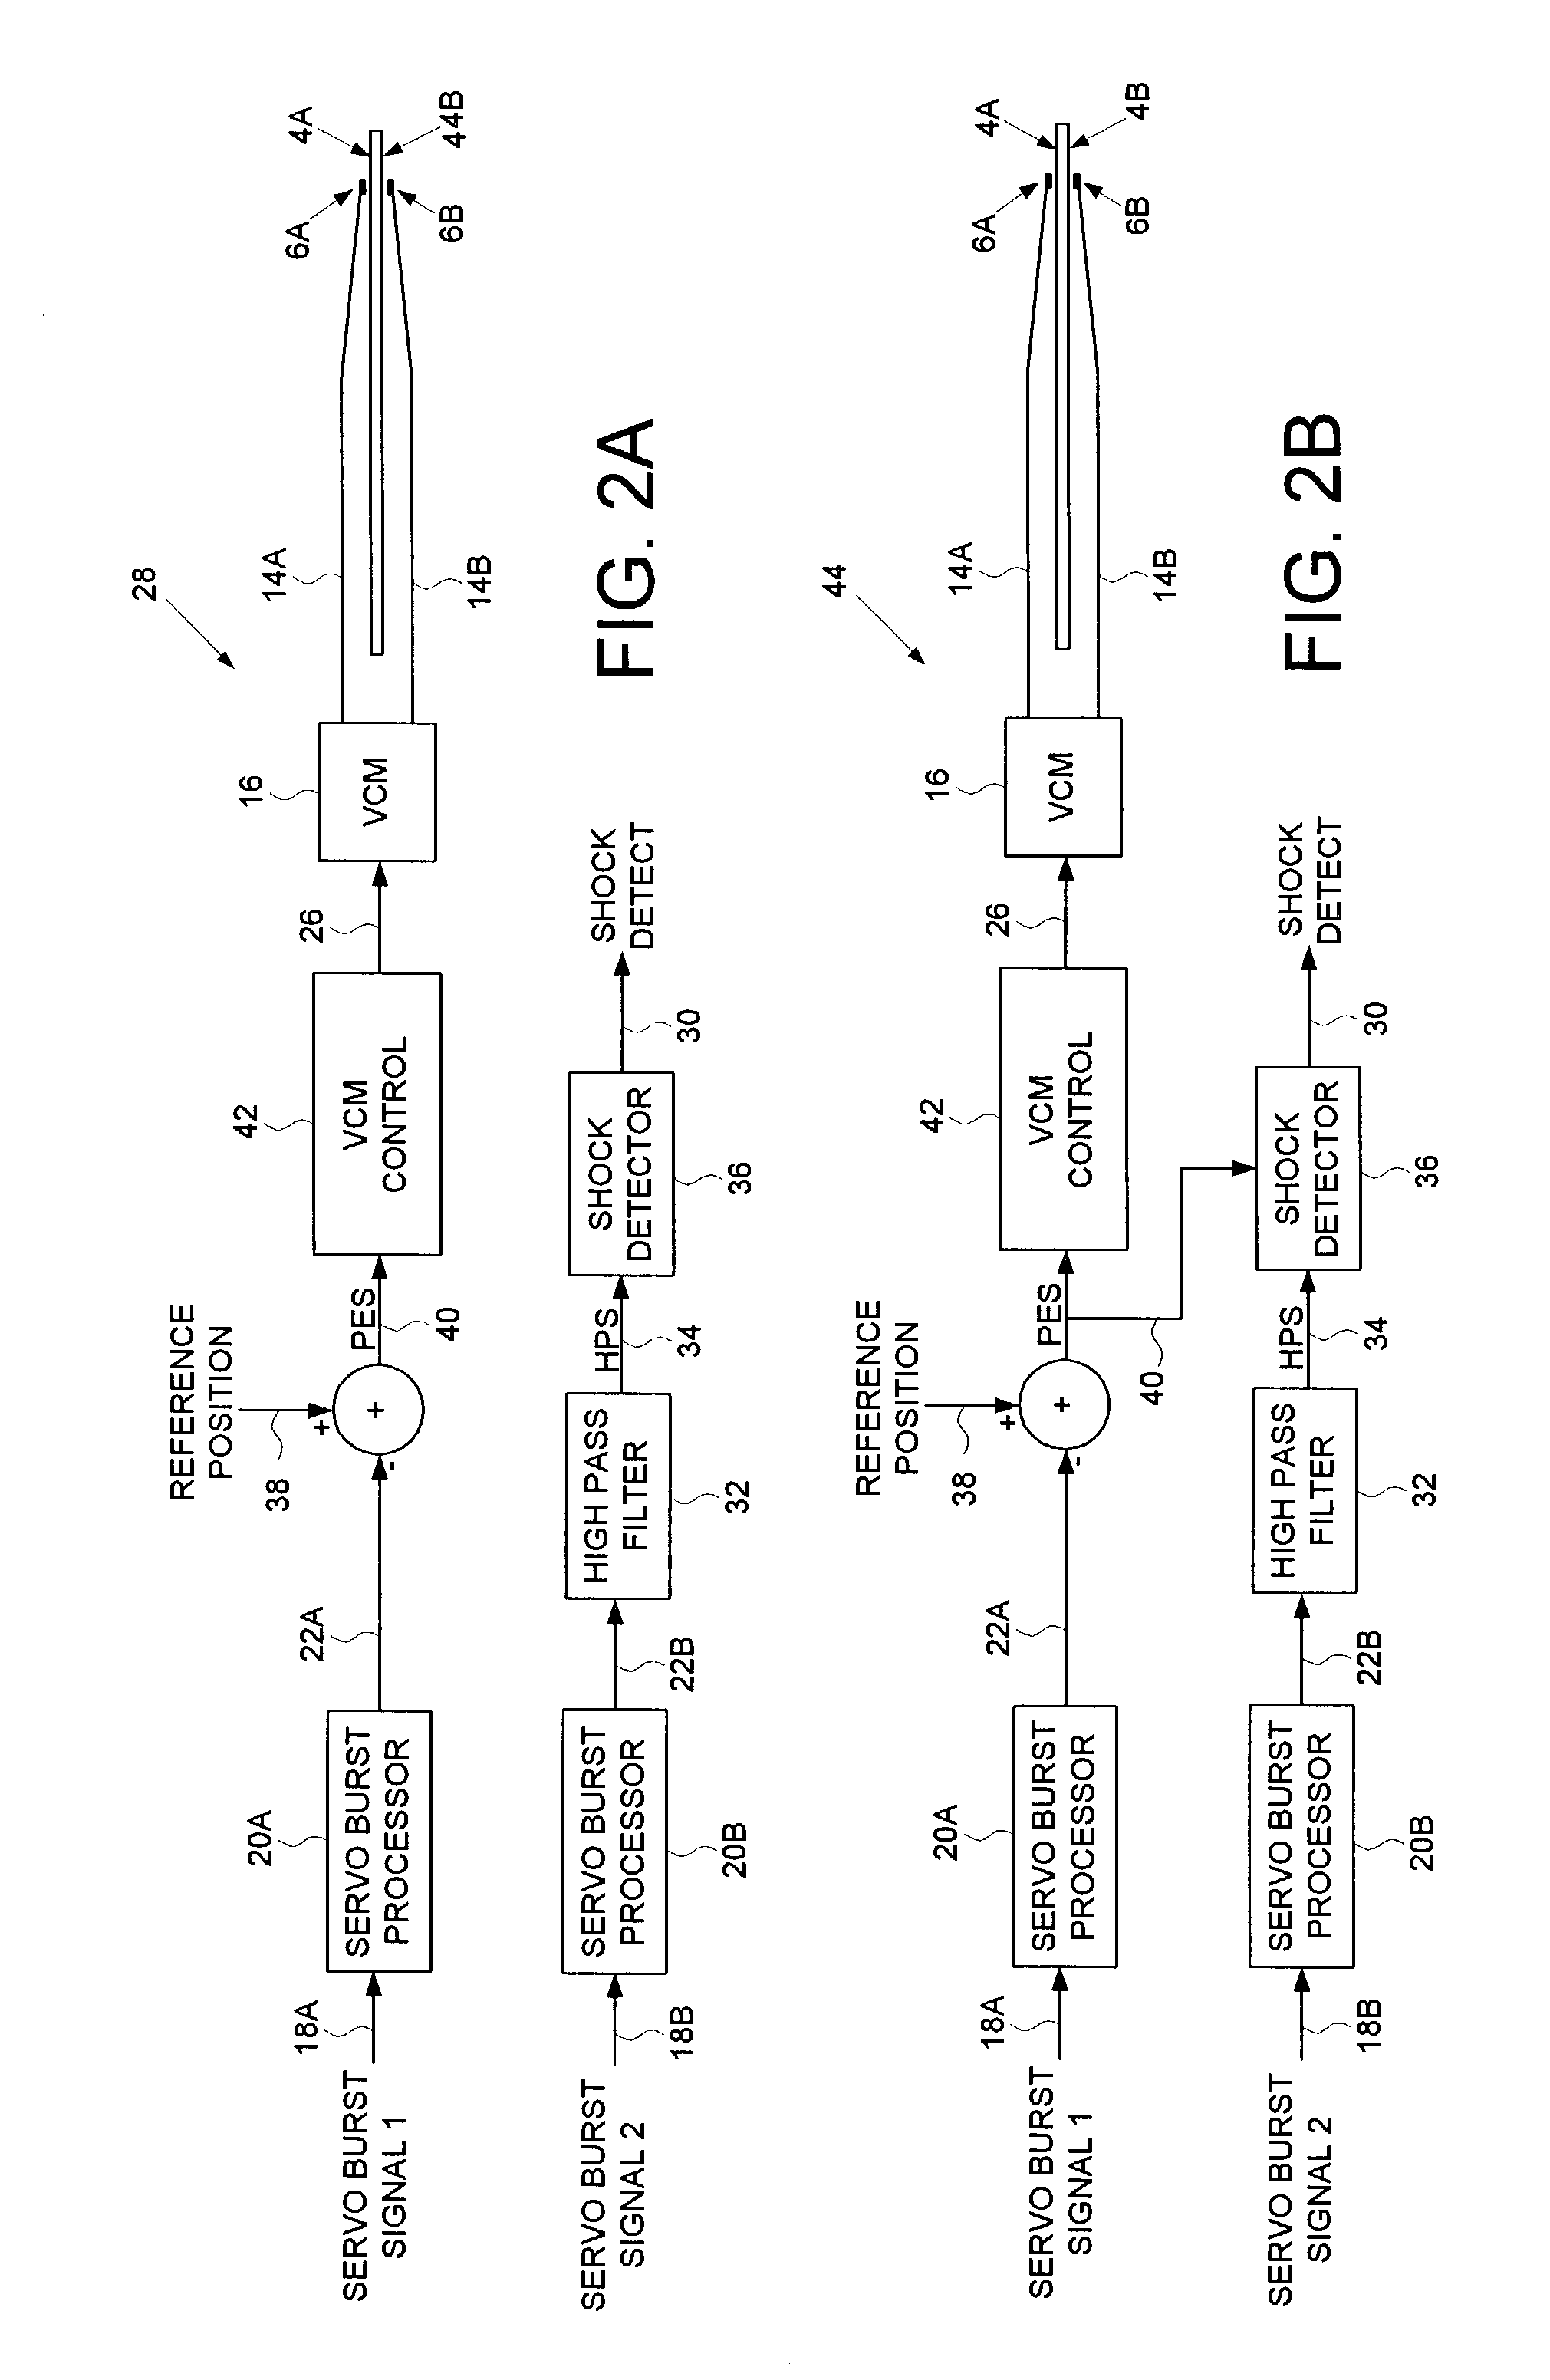 Disk drive reading servo sectors recorded at a relative offset on multiple disk surfaces to increase the servo sample rate